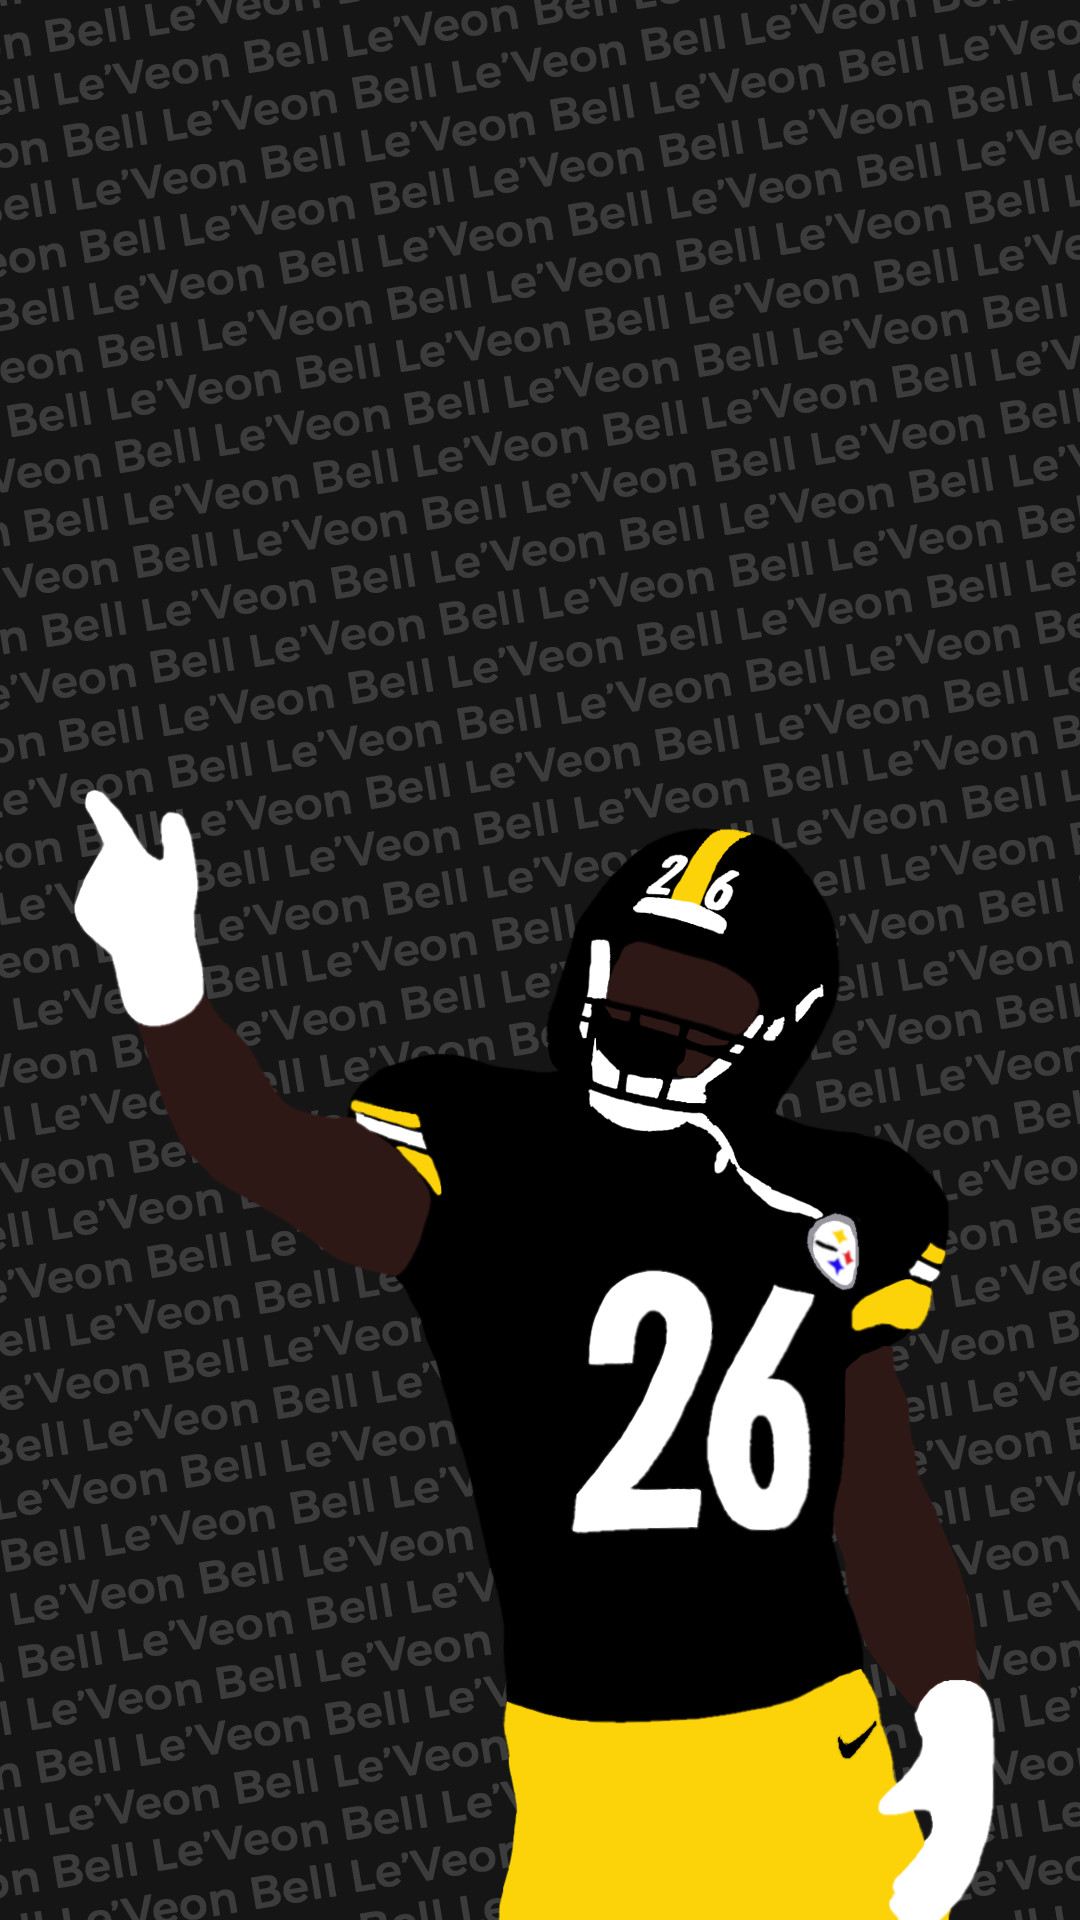 I made another wallpaper, this one with LeVeon Bell